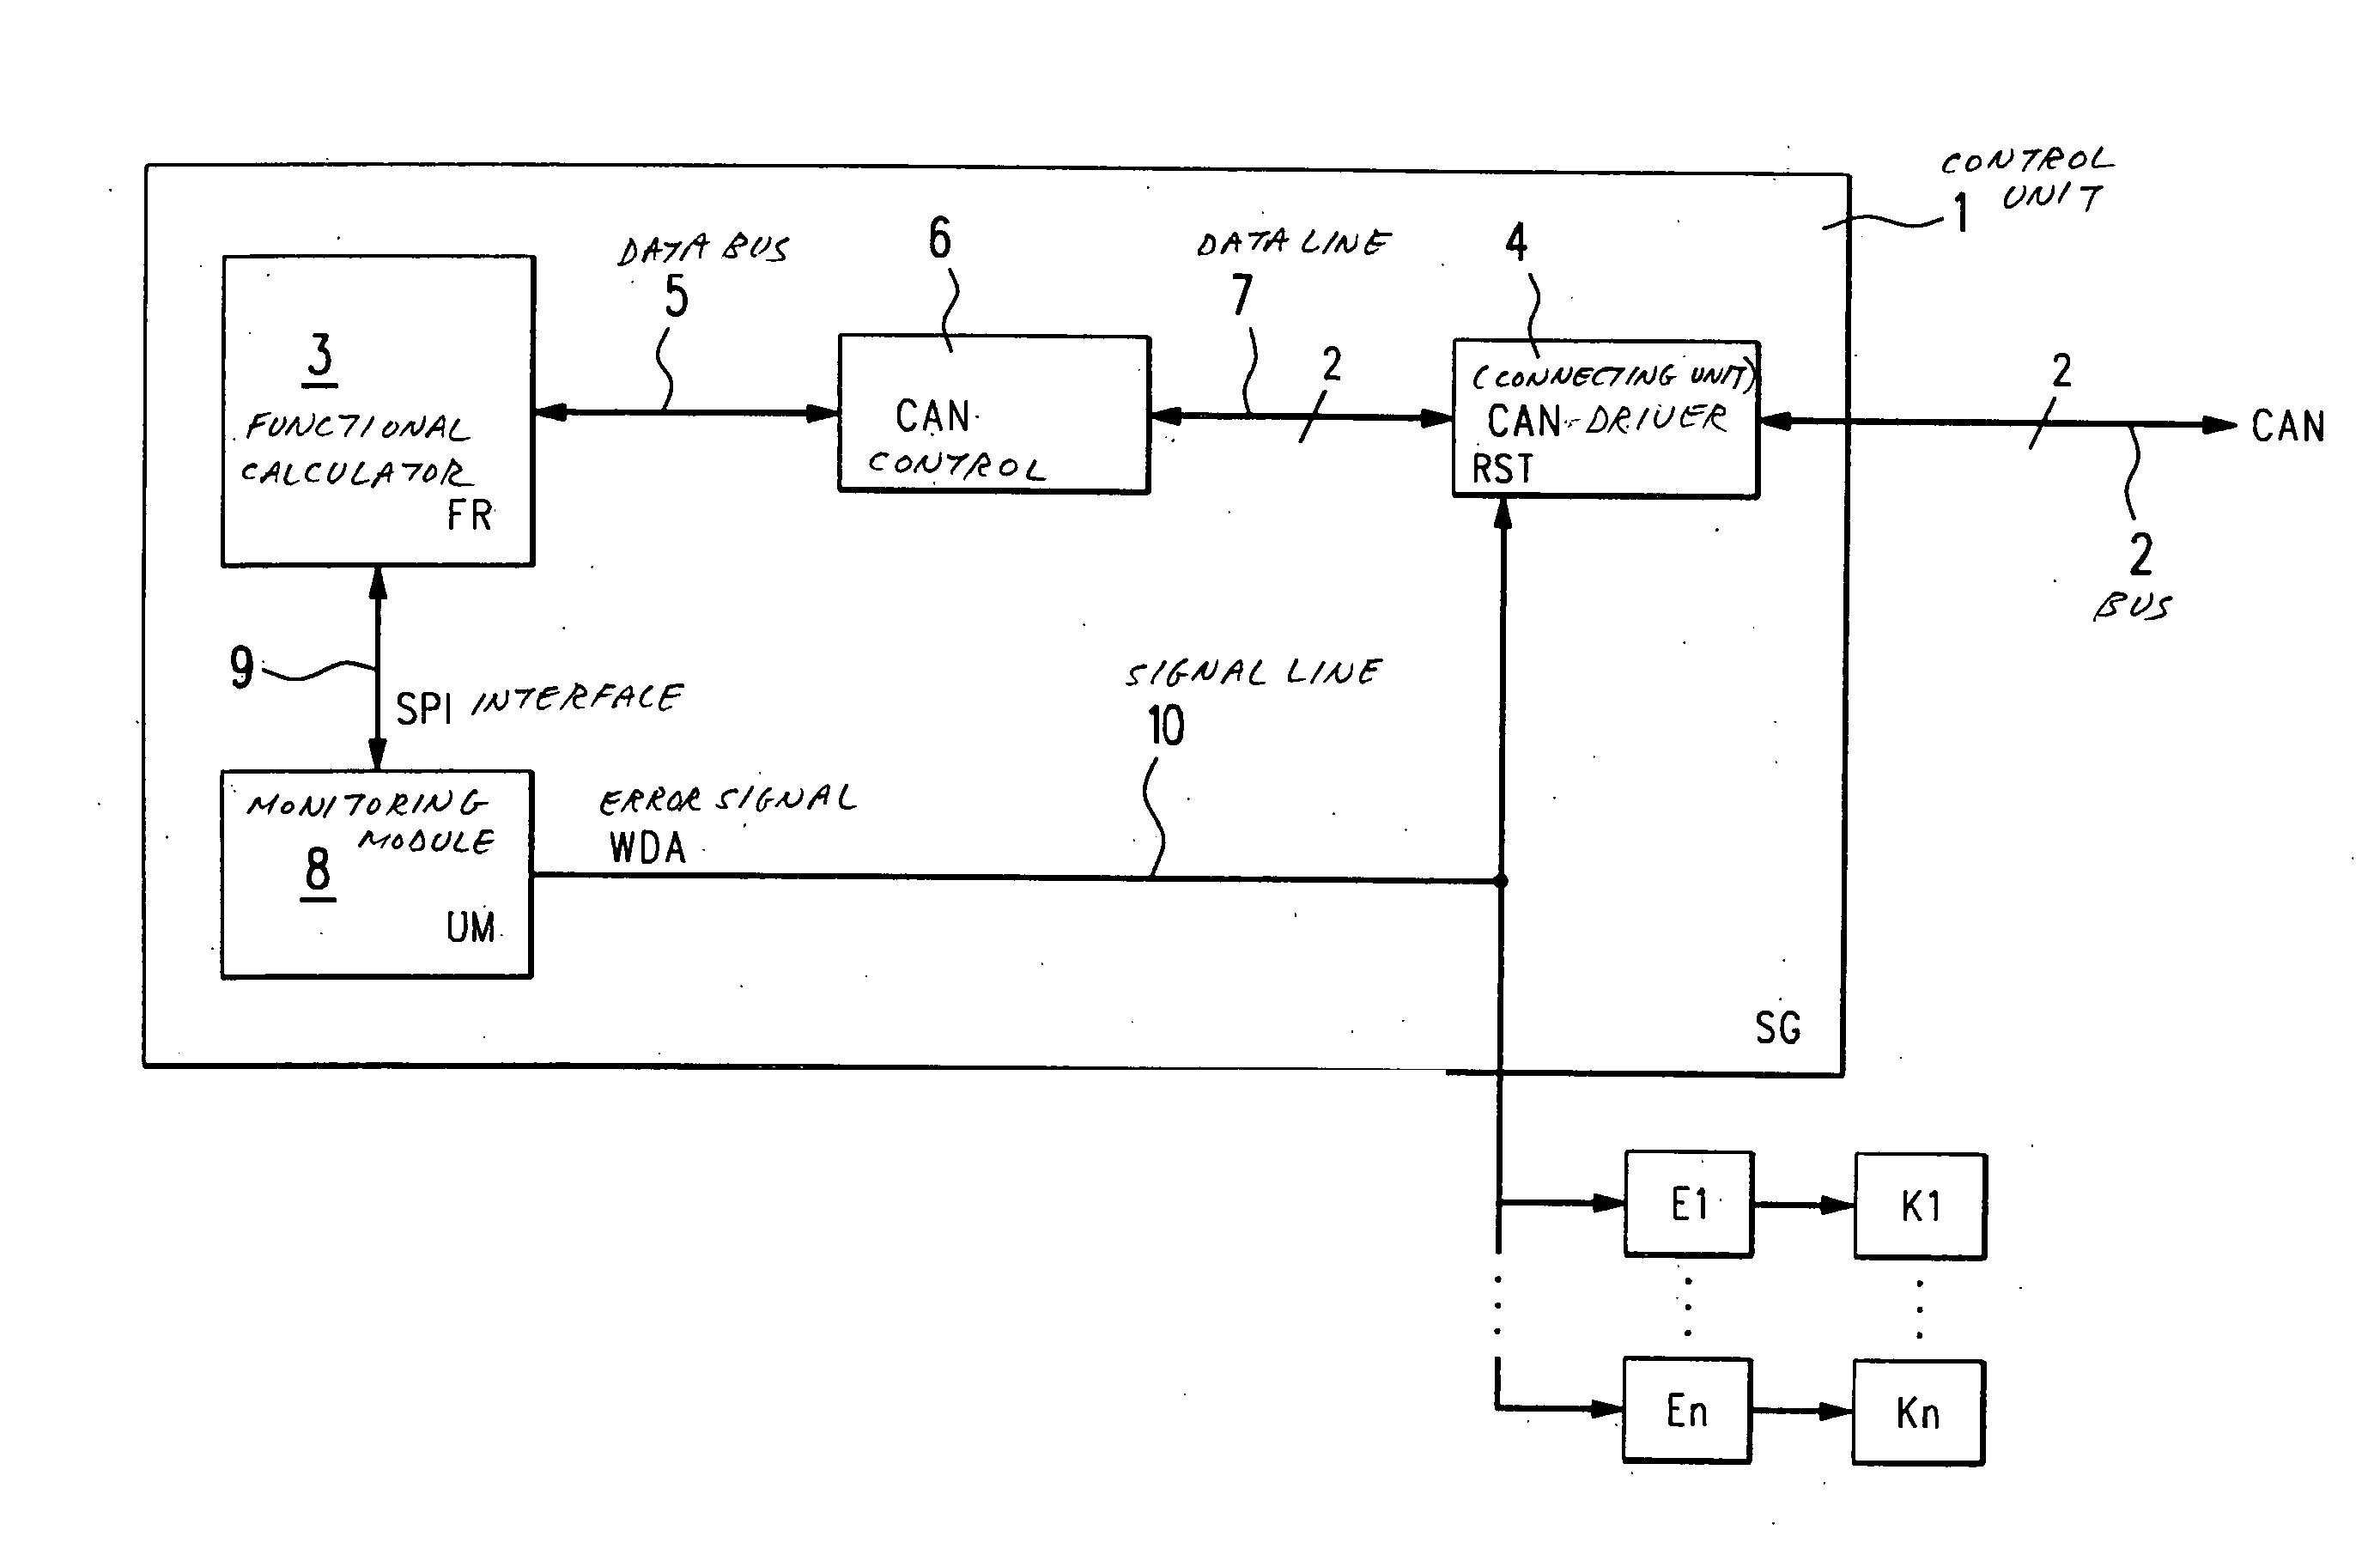 Method and device for controlling operational processes, especially in a vehicle